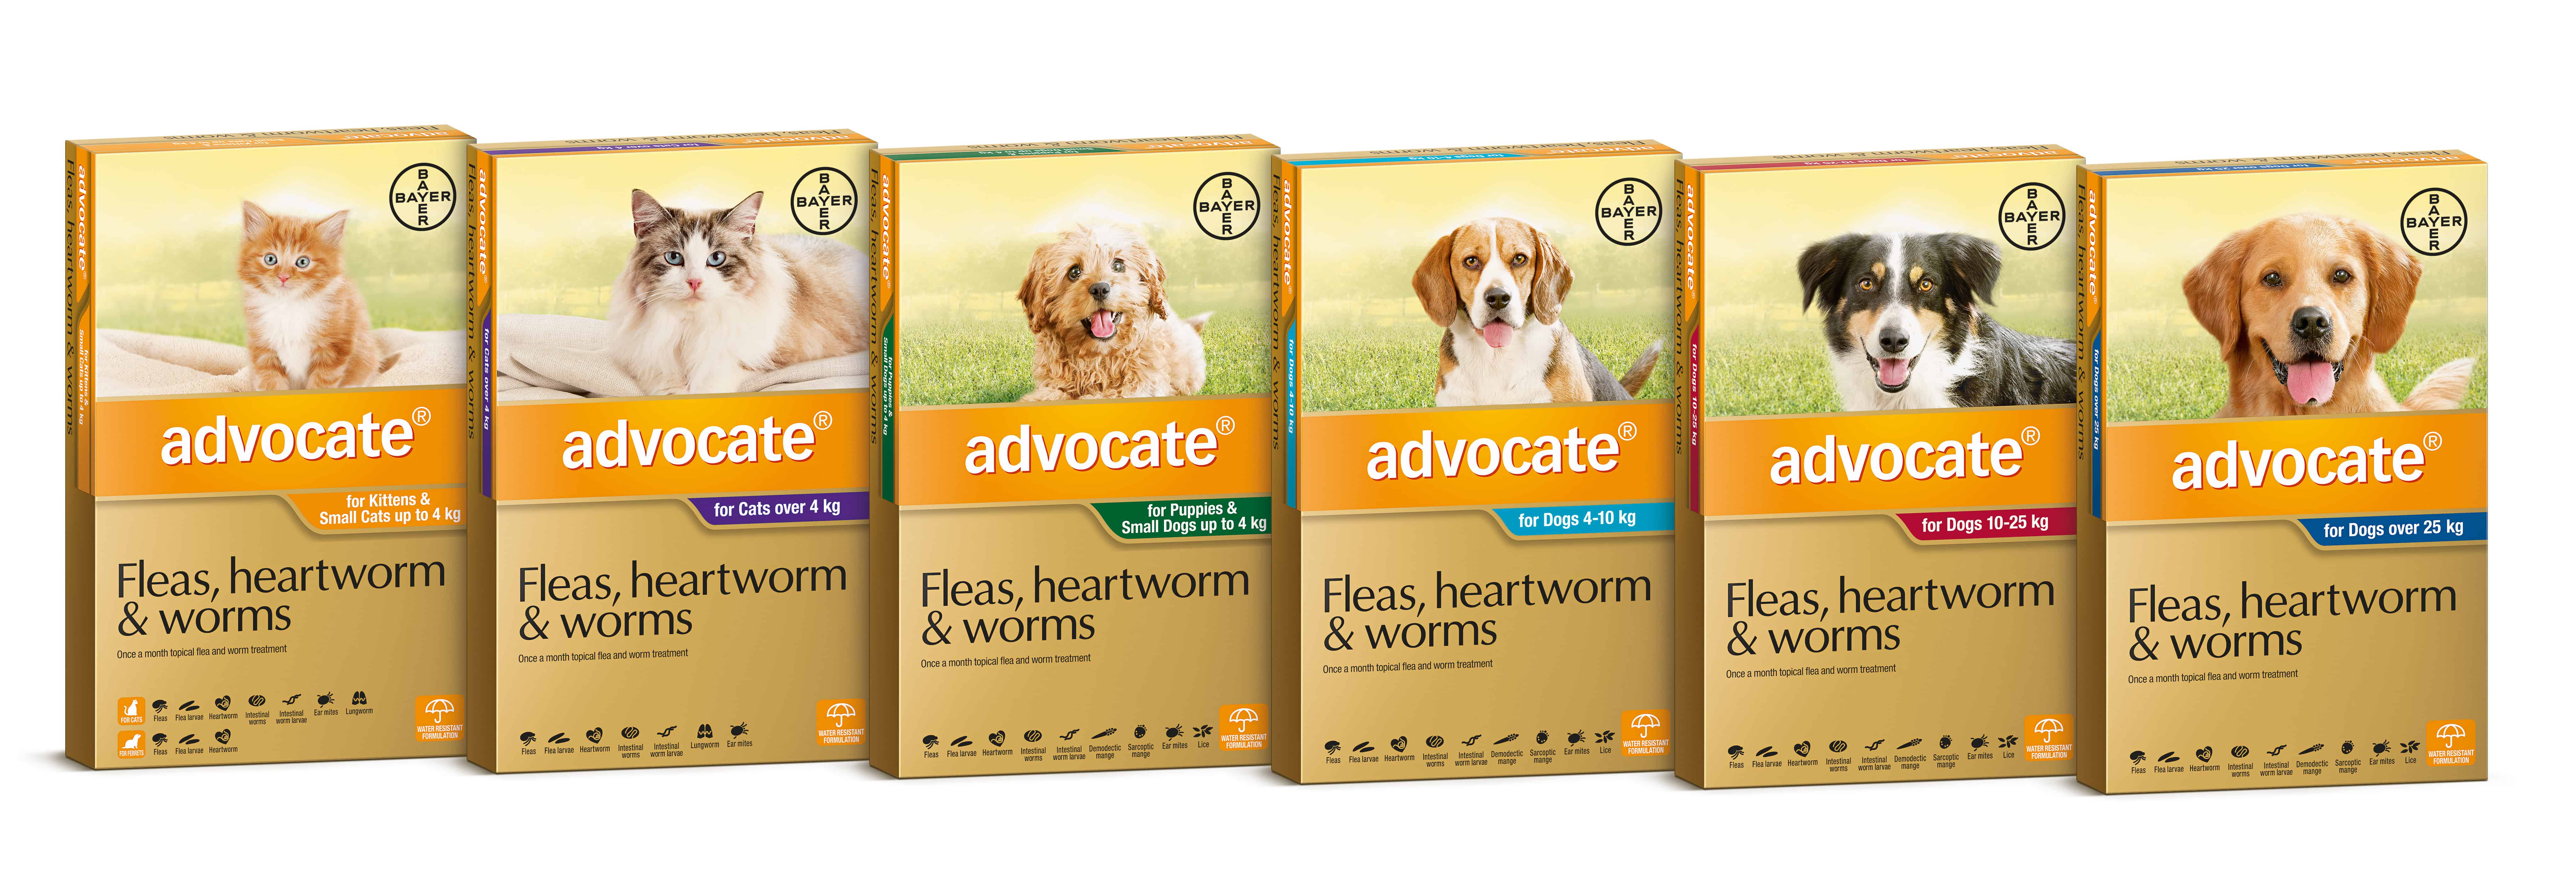 WIN a year’s supply of Advocate® for your cat or dog